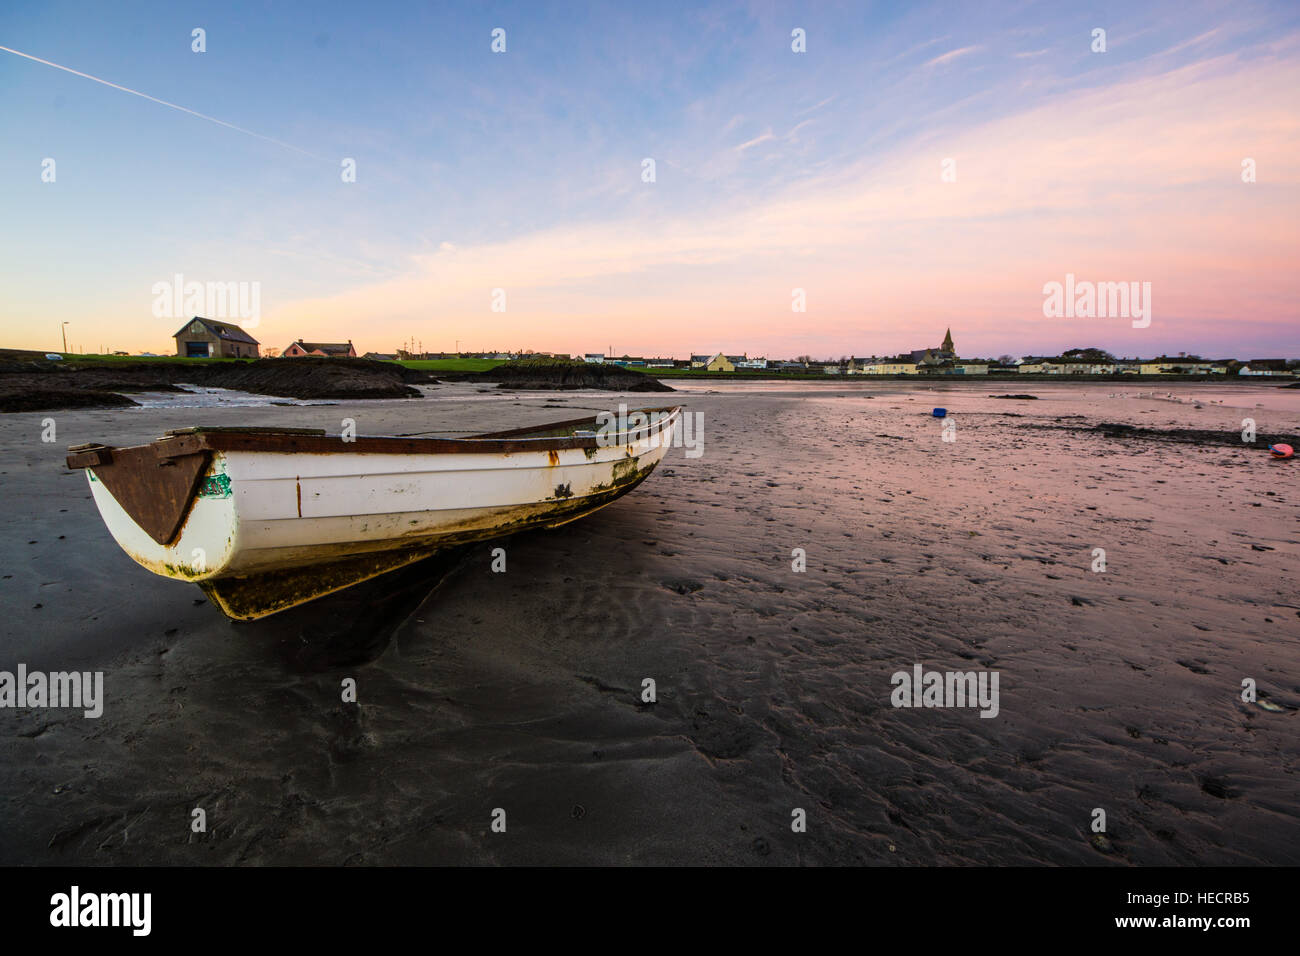 Ballywalter, Co Down, N Ireland, UK. 20th December 2016. UK Weather: A beautiful morning in Ballywalter on the eastern coast of Northern Ireland, the forecast is set to change for the afternoon as a spell of wet weather moves in from the west. Credit: gary telford/Alamy Live News Stock Photo